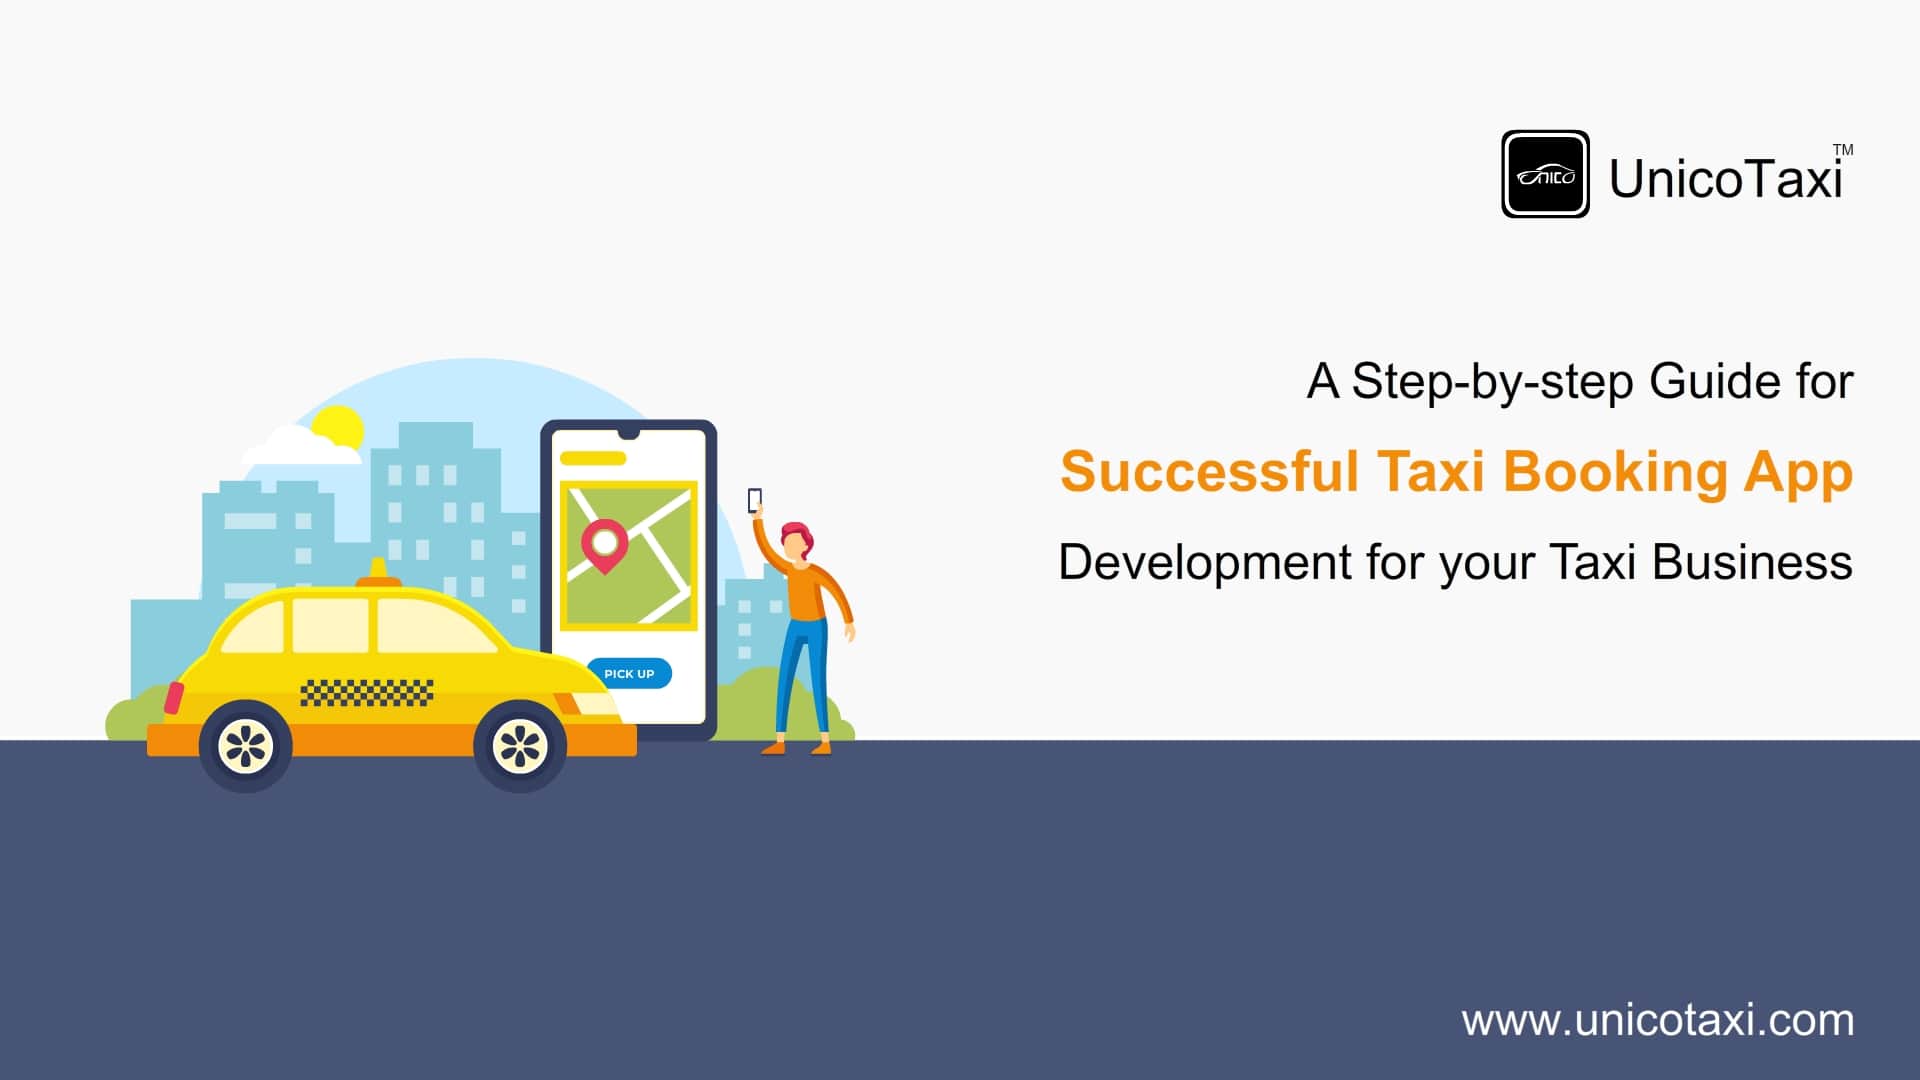 Step-by-step Guide Successful Taxi Booking App Development